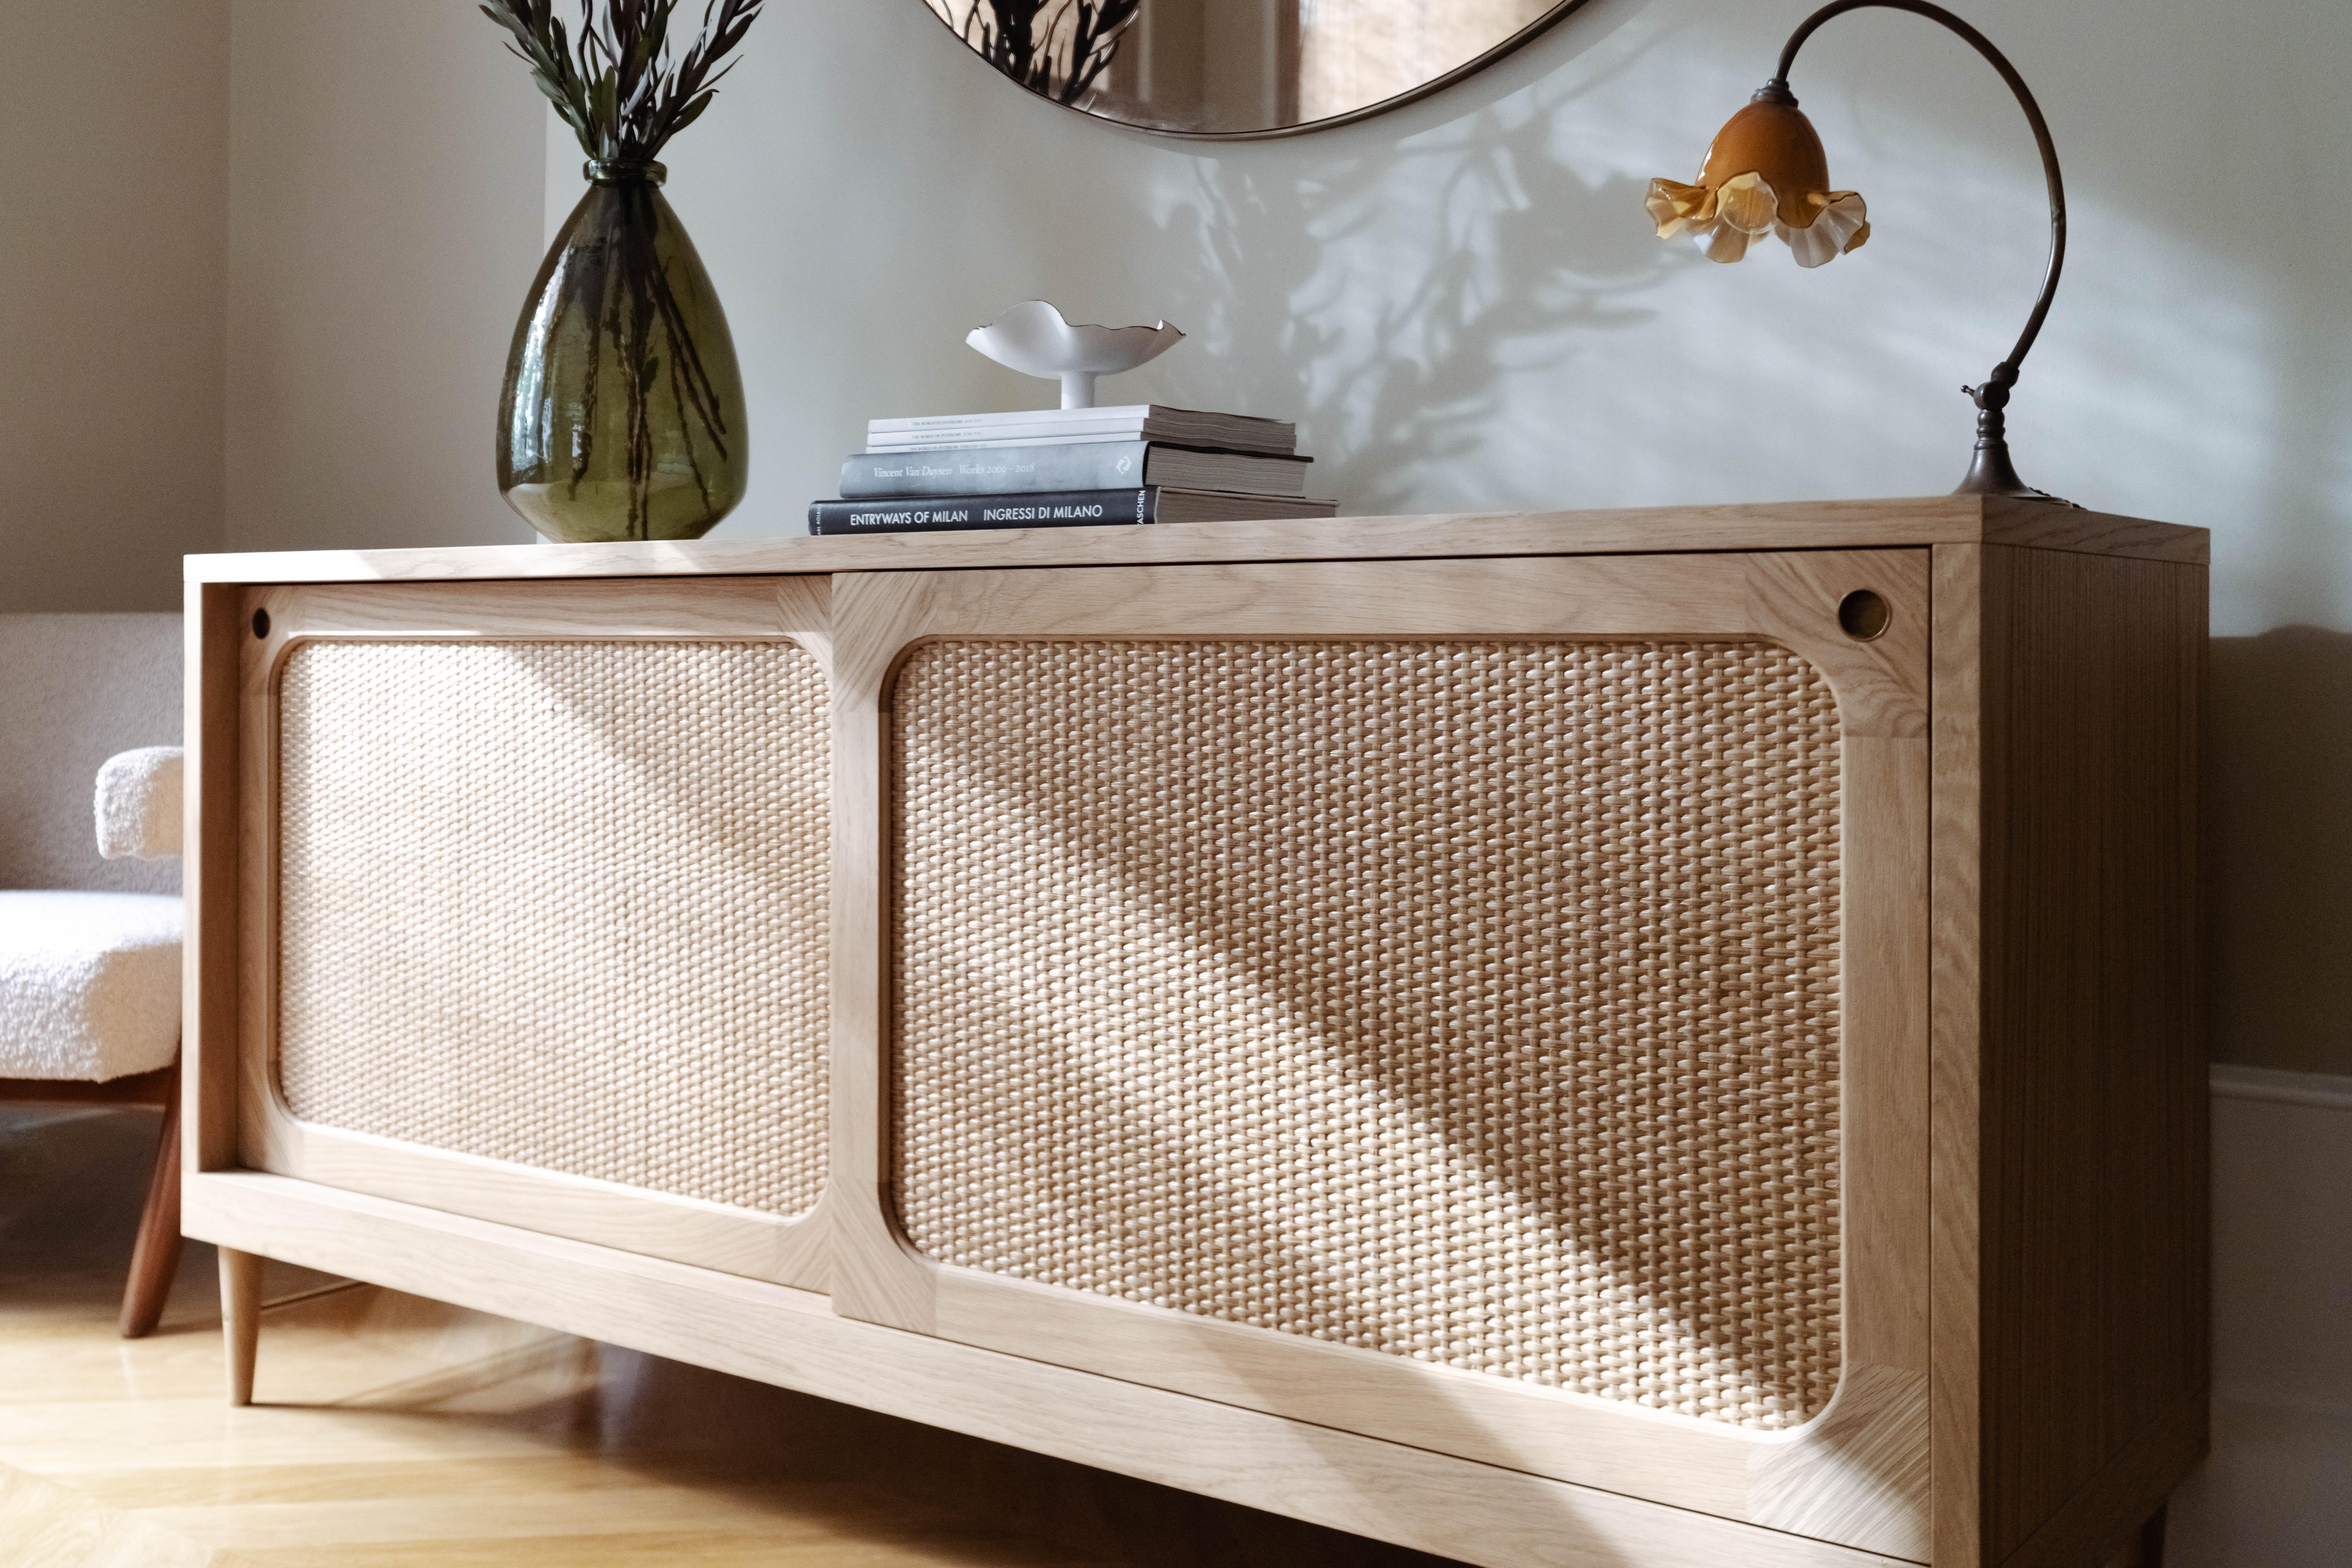 Art Deco Sanders Sideboard by Lind + Almond in Natural Oak and Rattan (Small)